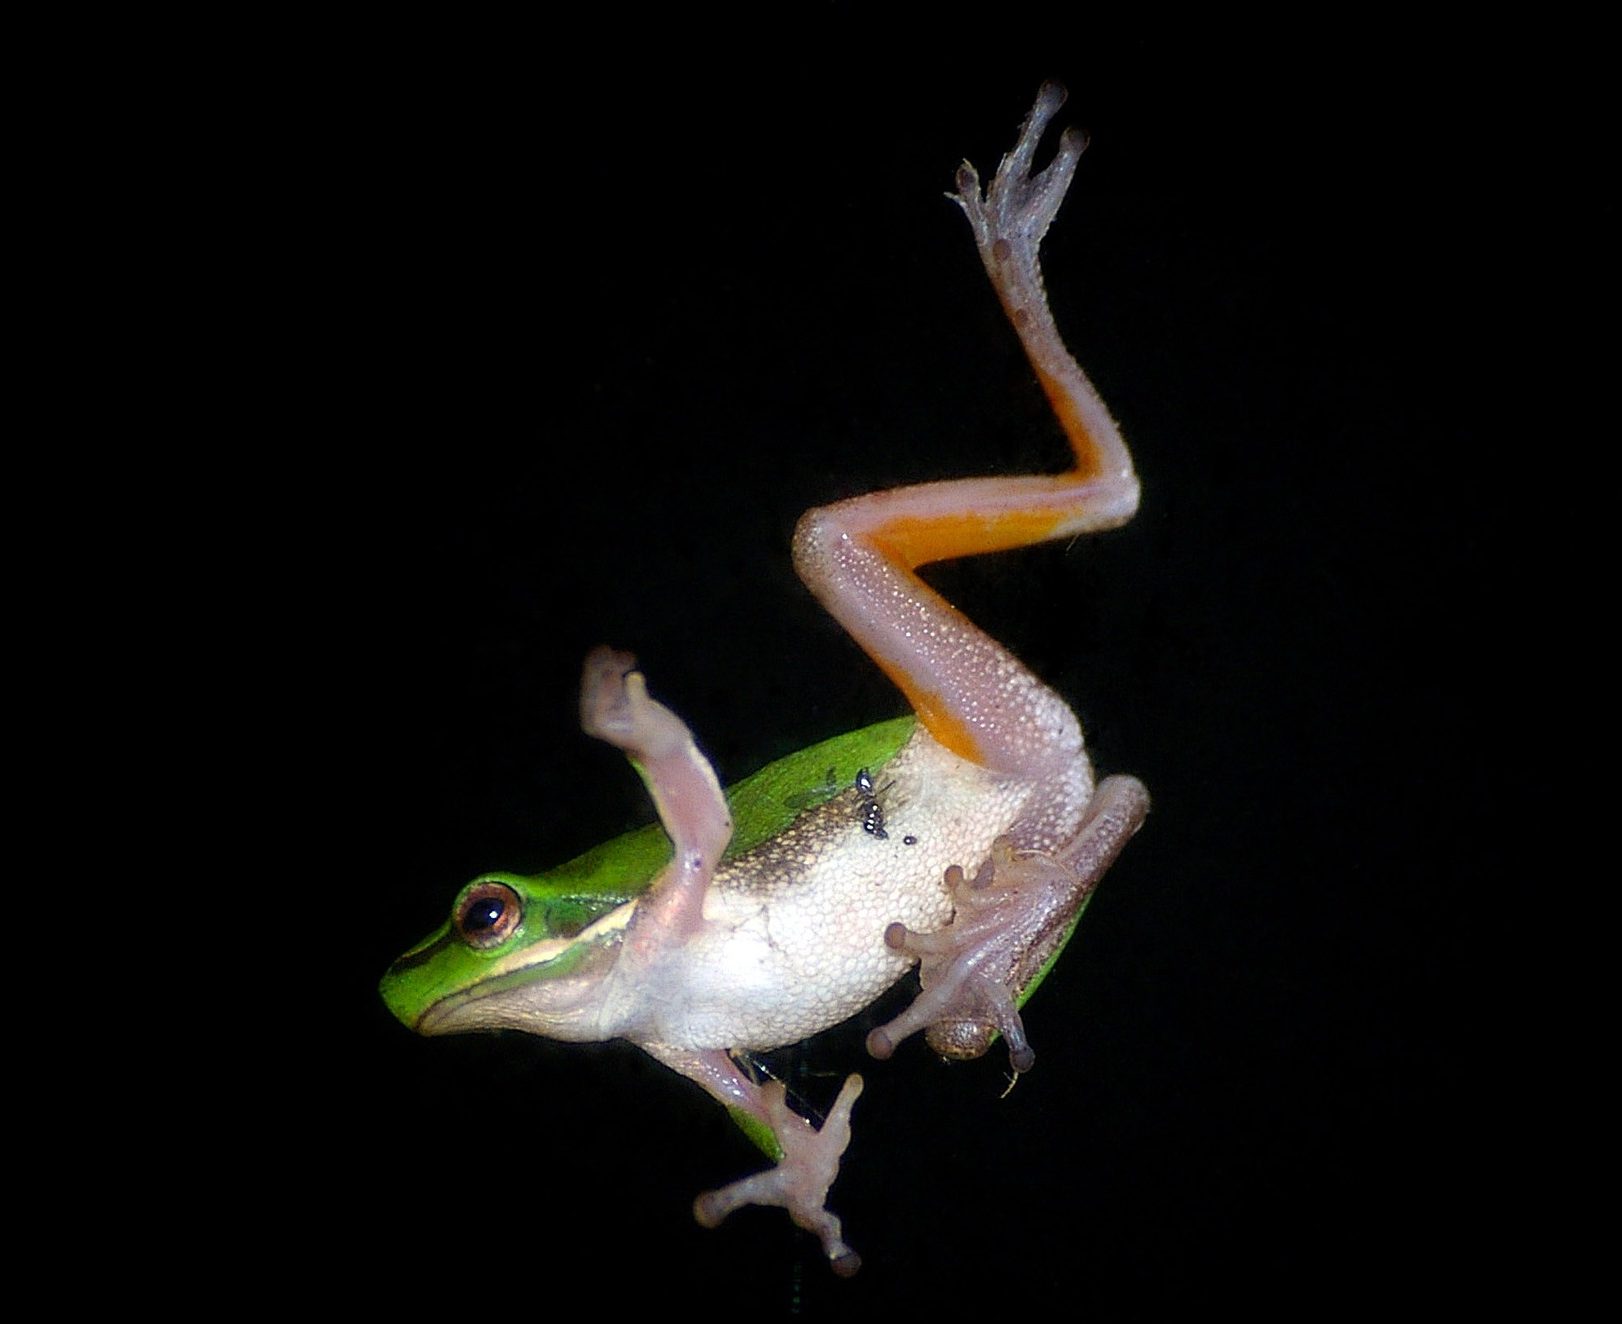 Levitating frogs and the power of playLevitating frogs and the power of play